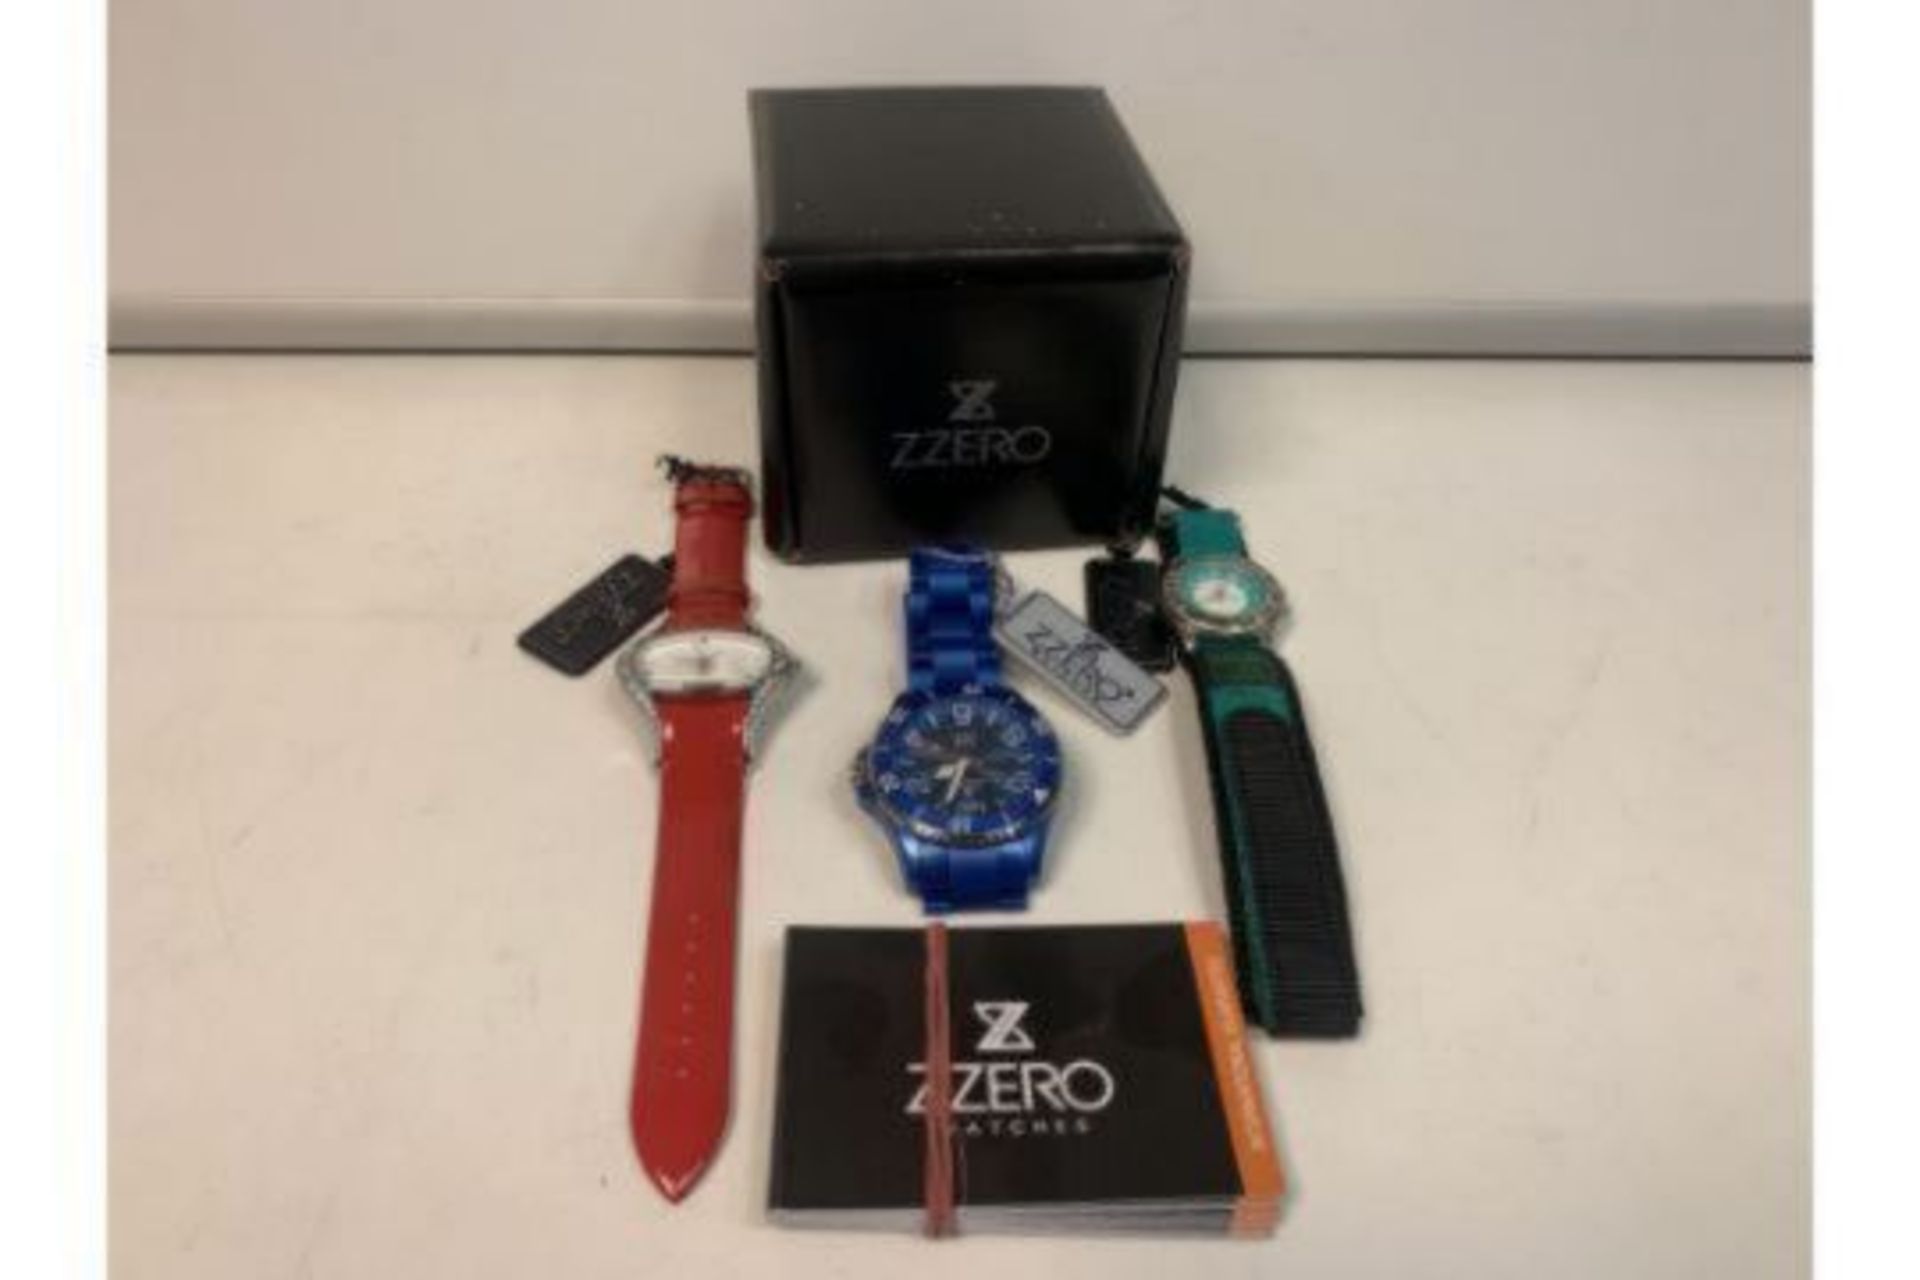 10 X BRAND NEW ZERRO WATCHES ASSORTED RRP £50 EACH INSL